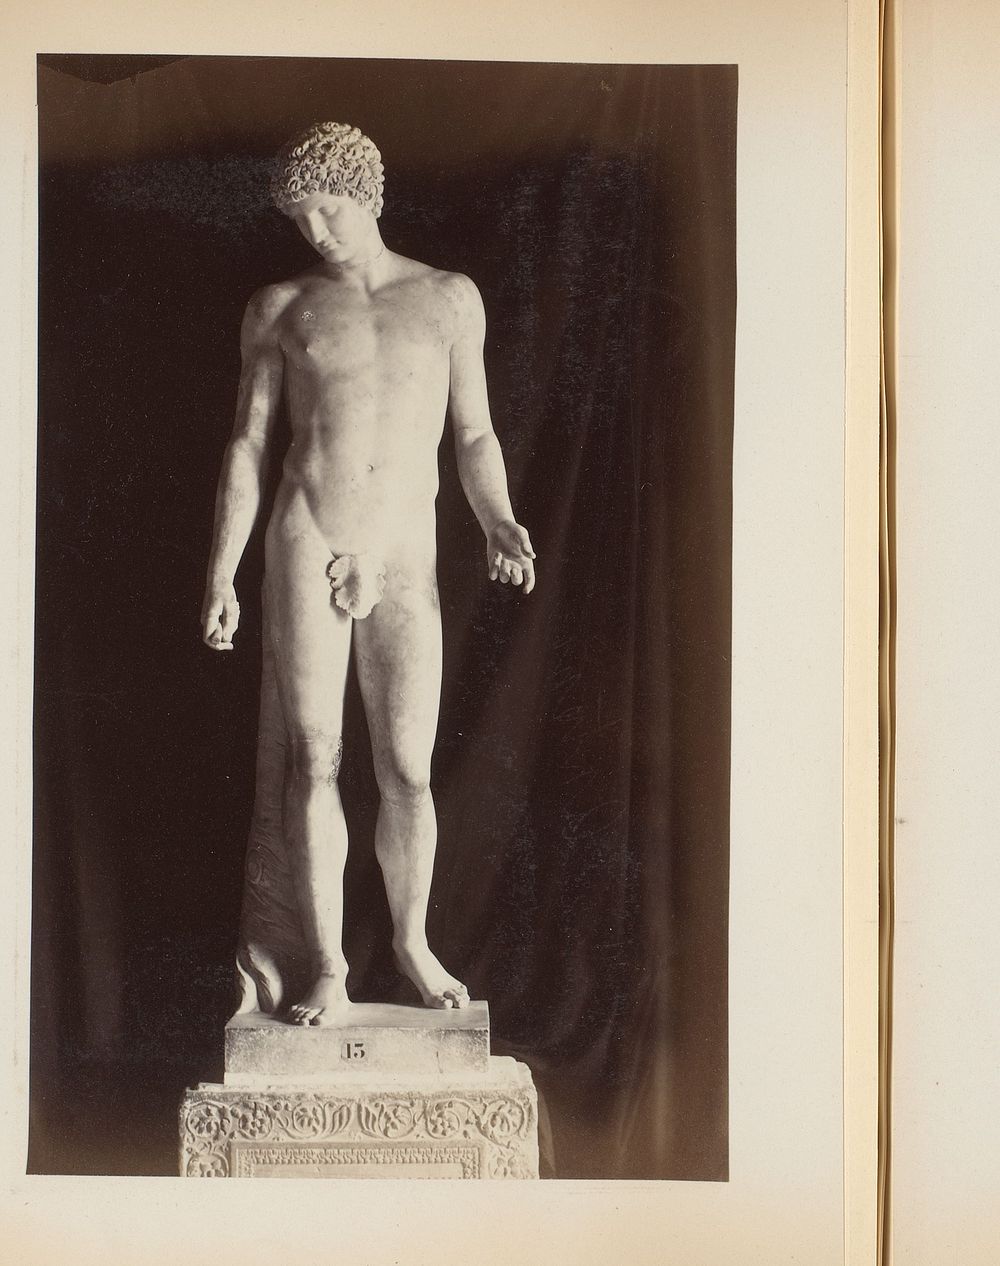 Sculptuur van Antinoüs in de Capitolijnse Musea te Rome, Italië (1870 - 1890) by anonymous and anonymous